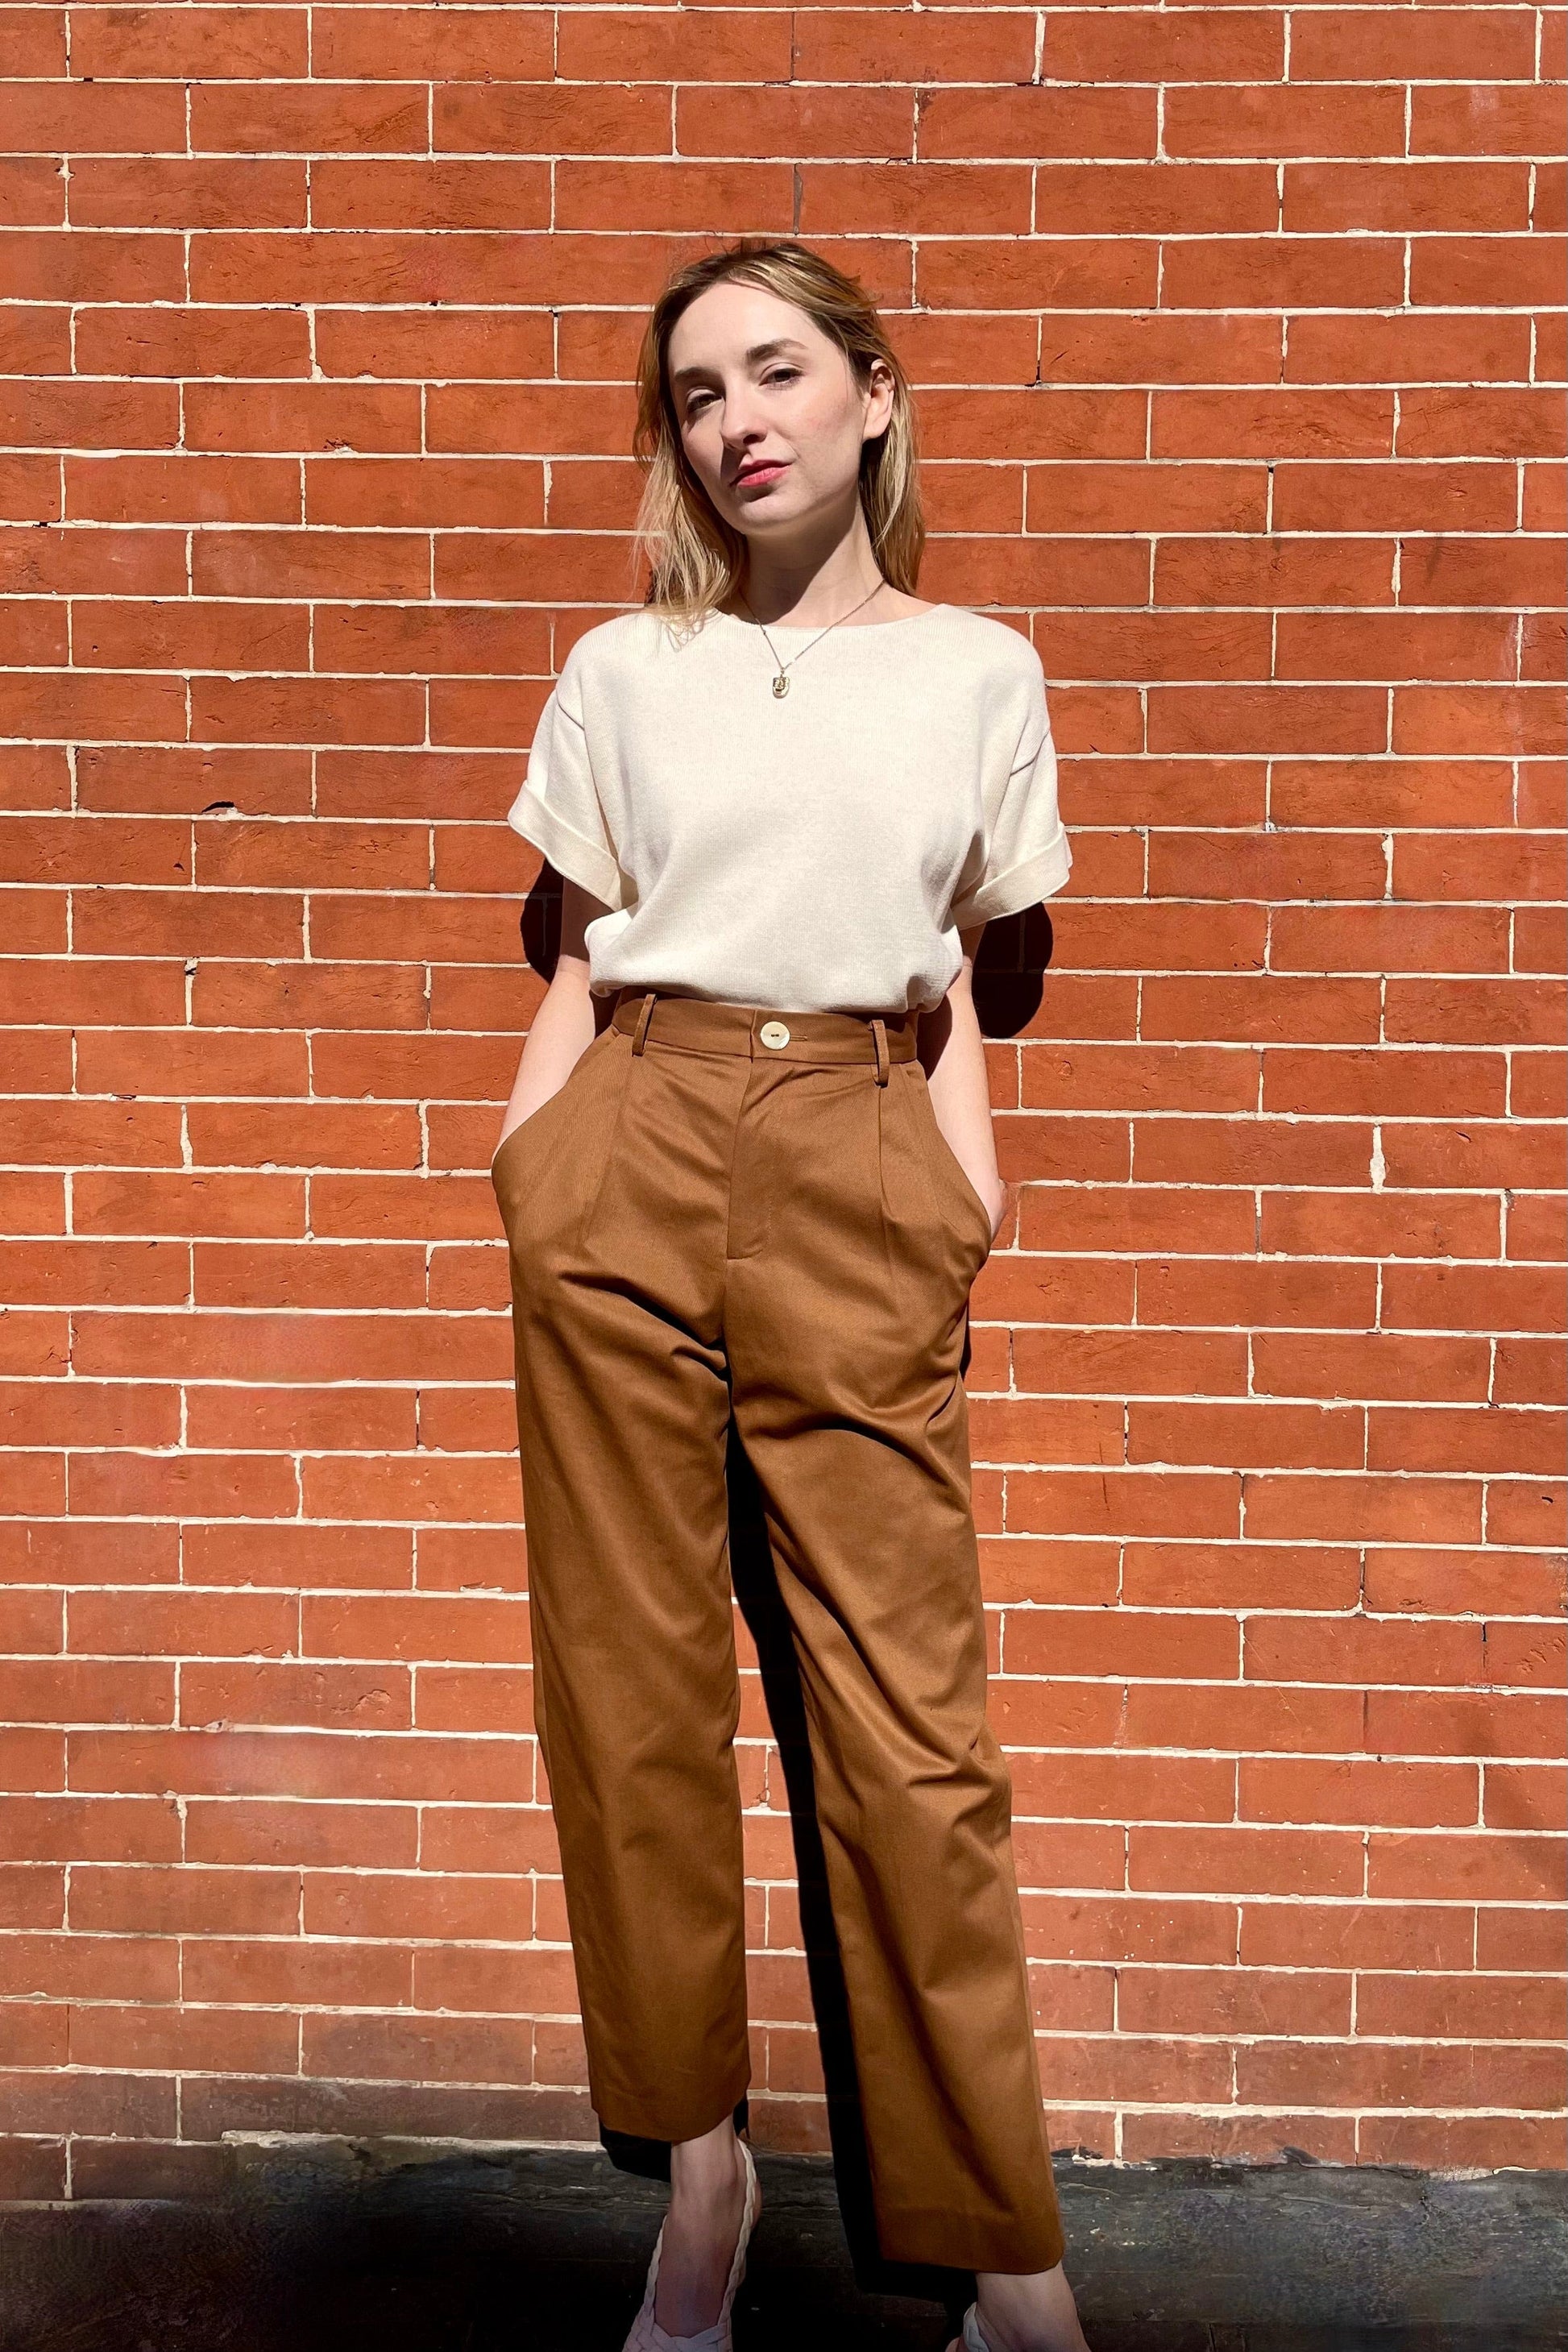 Sophia Pant in Cotton Twill Pant CHRISTINE ALCALAY Cigar 0 